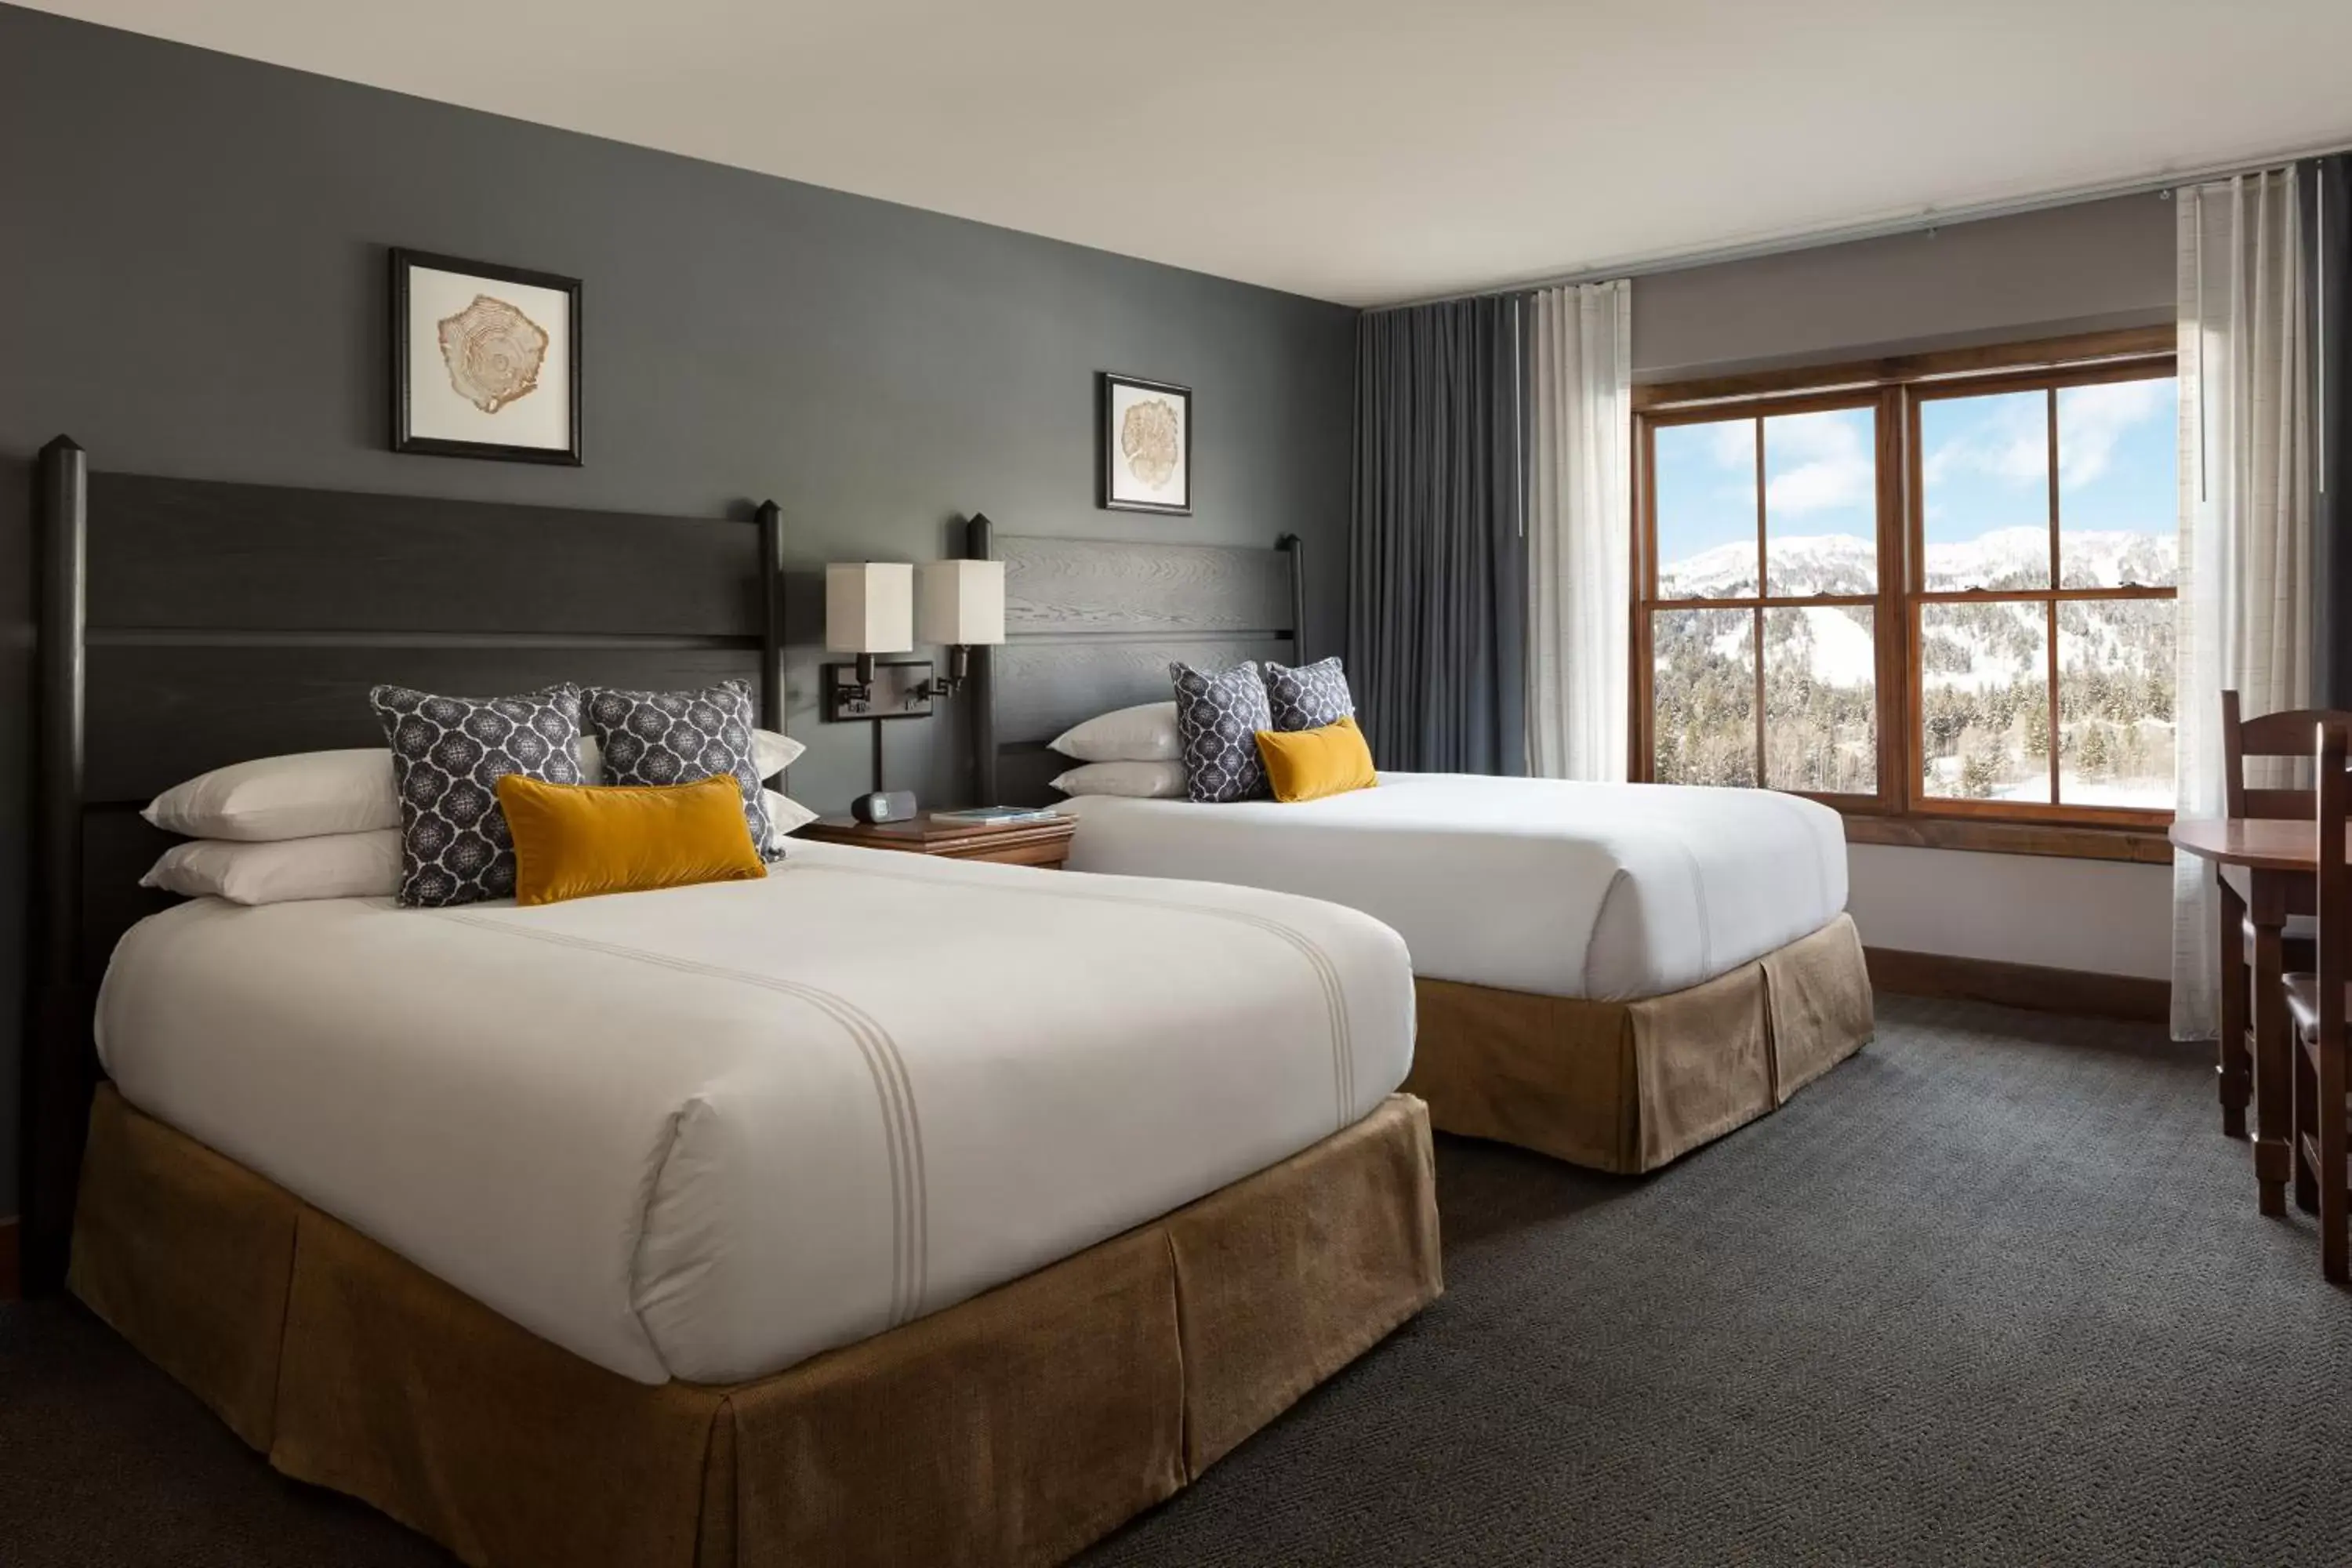 Bedroom in Teton Mountain Lodge and Spa, a Noble House Resort